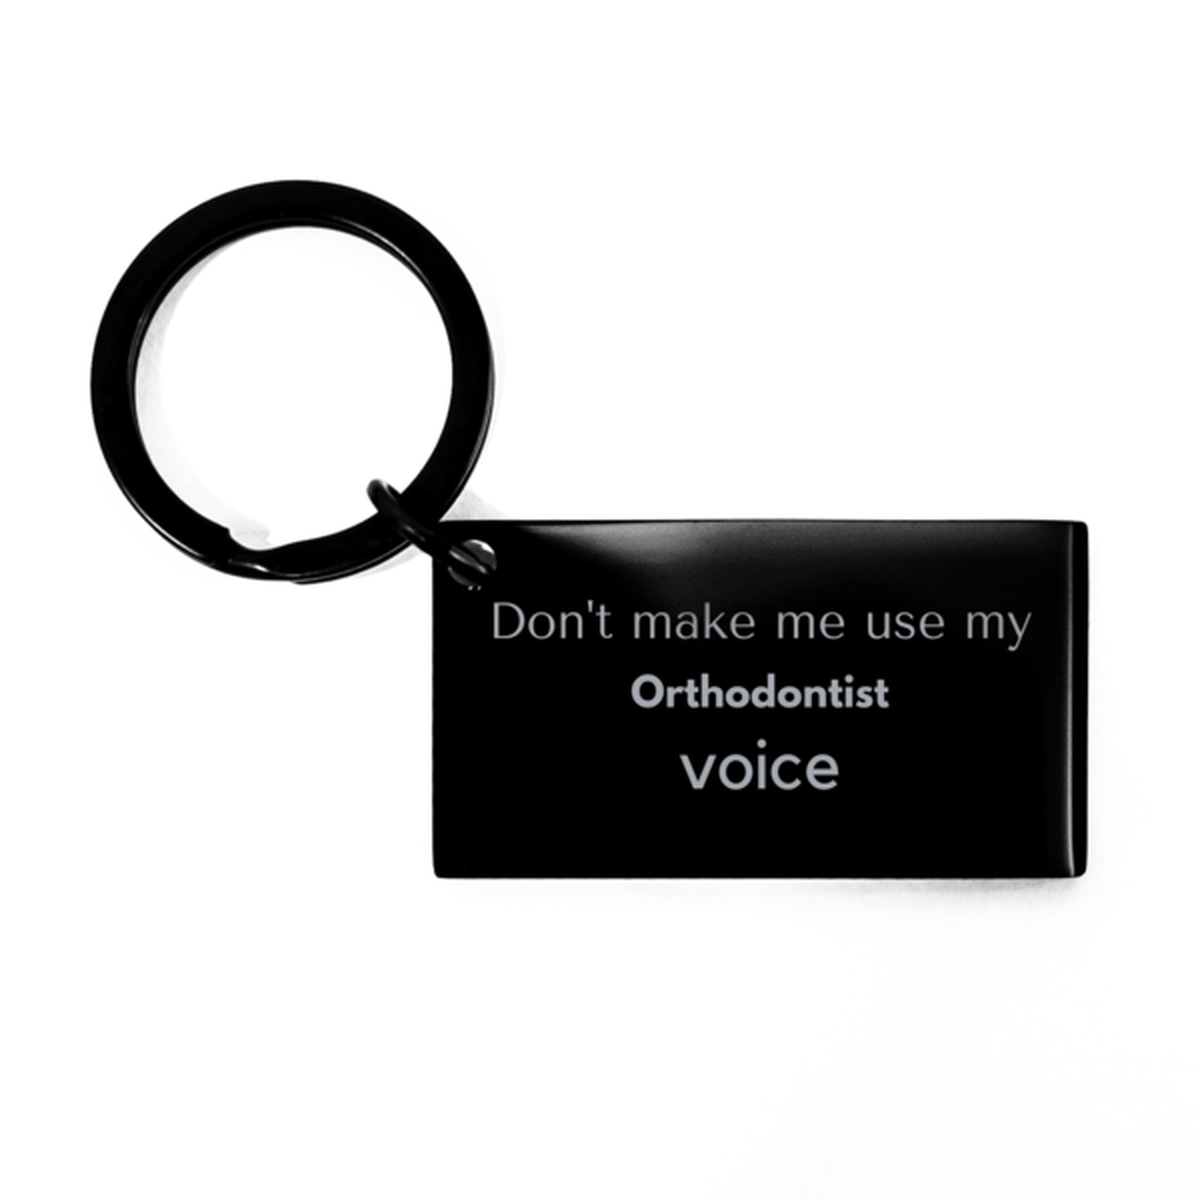 Don't make me use my Orthodontist voice, Sarcasm Orthodontist Gifts, Christmas Orthodontist Keychain Birthday Unique Gifts For Orthodontist Coworkers, Men, Women, Colleague, Friends